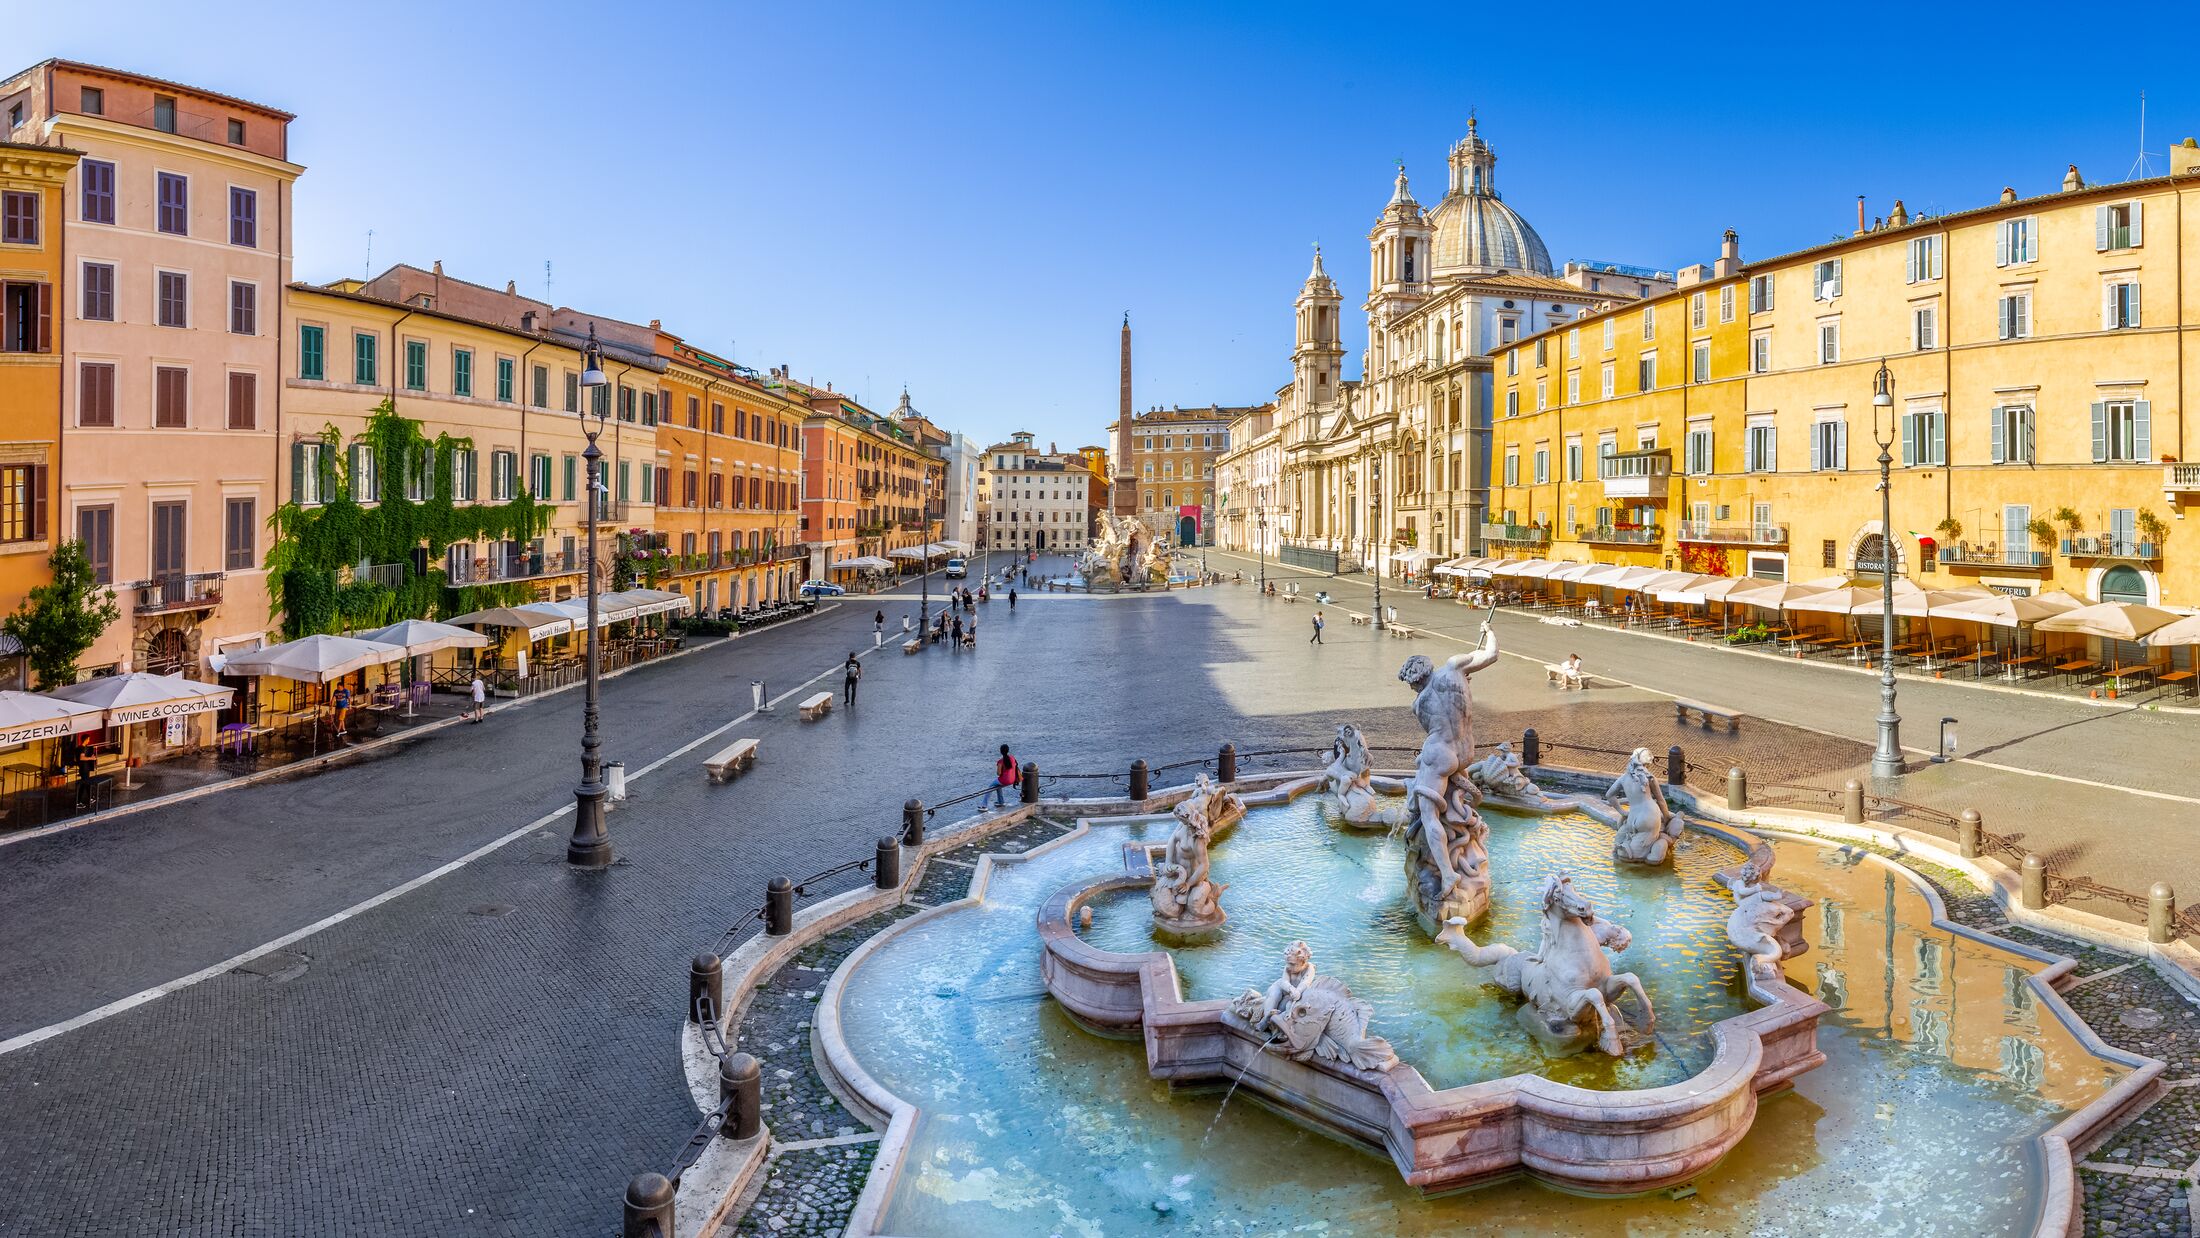 Aerial view of Navona Square, Piazza Navona in Rome, Italy. Rome architecture and landmark. Piazza Navona is one of the main attractions of Rome and Italy.